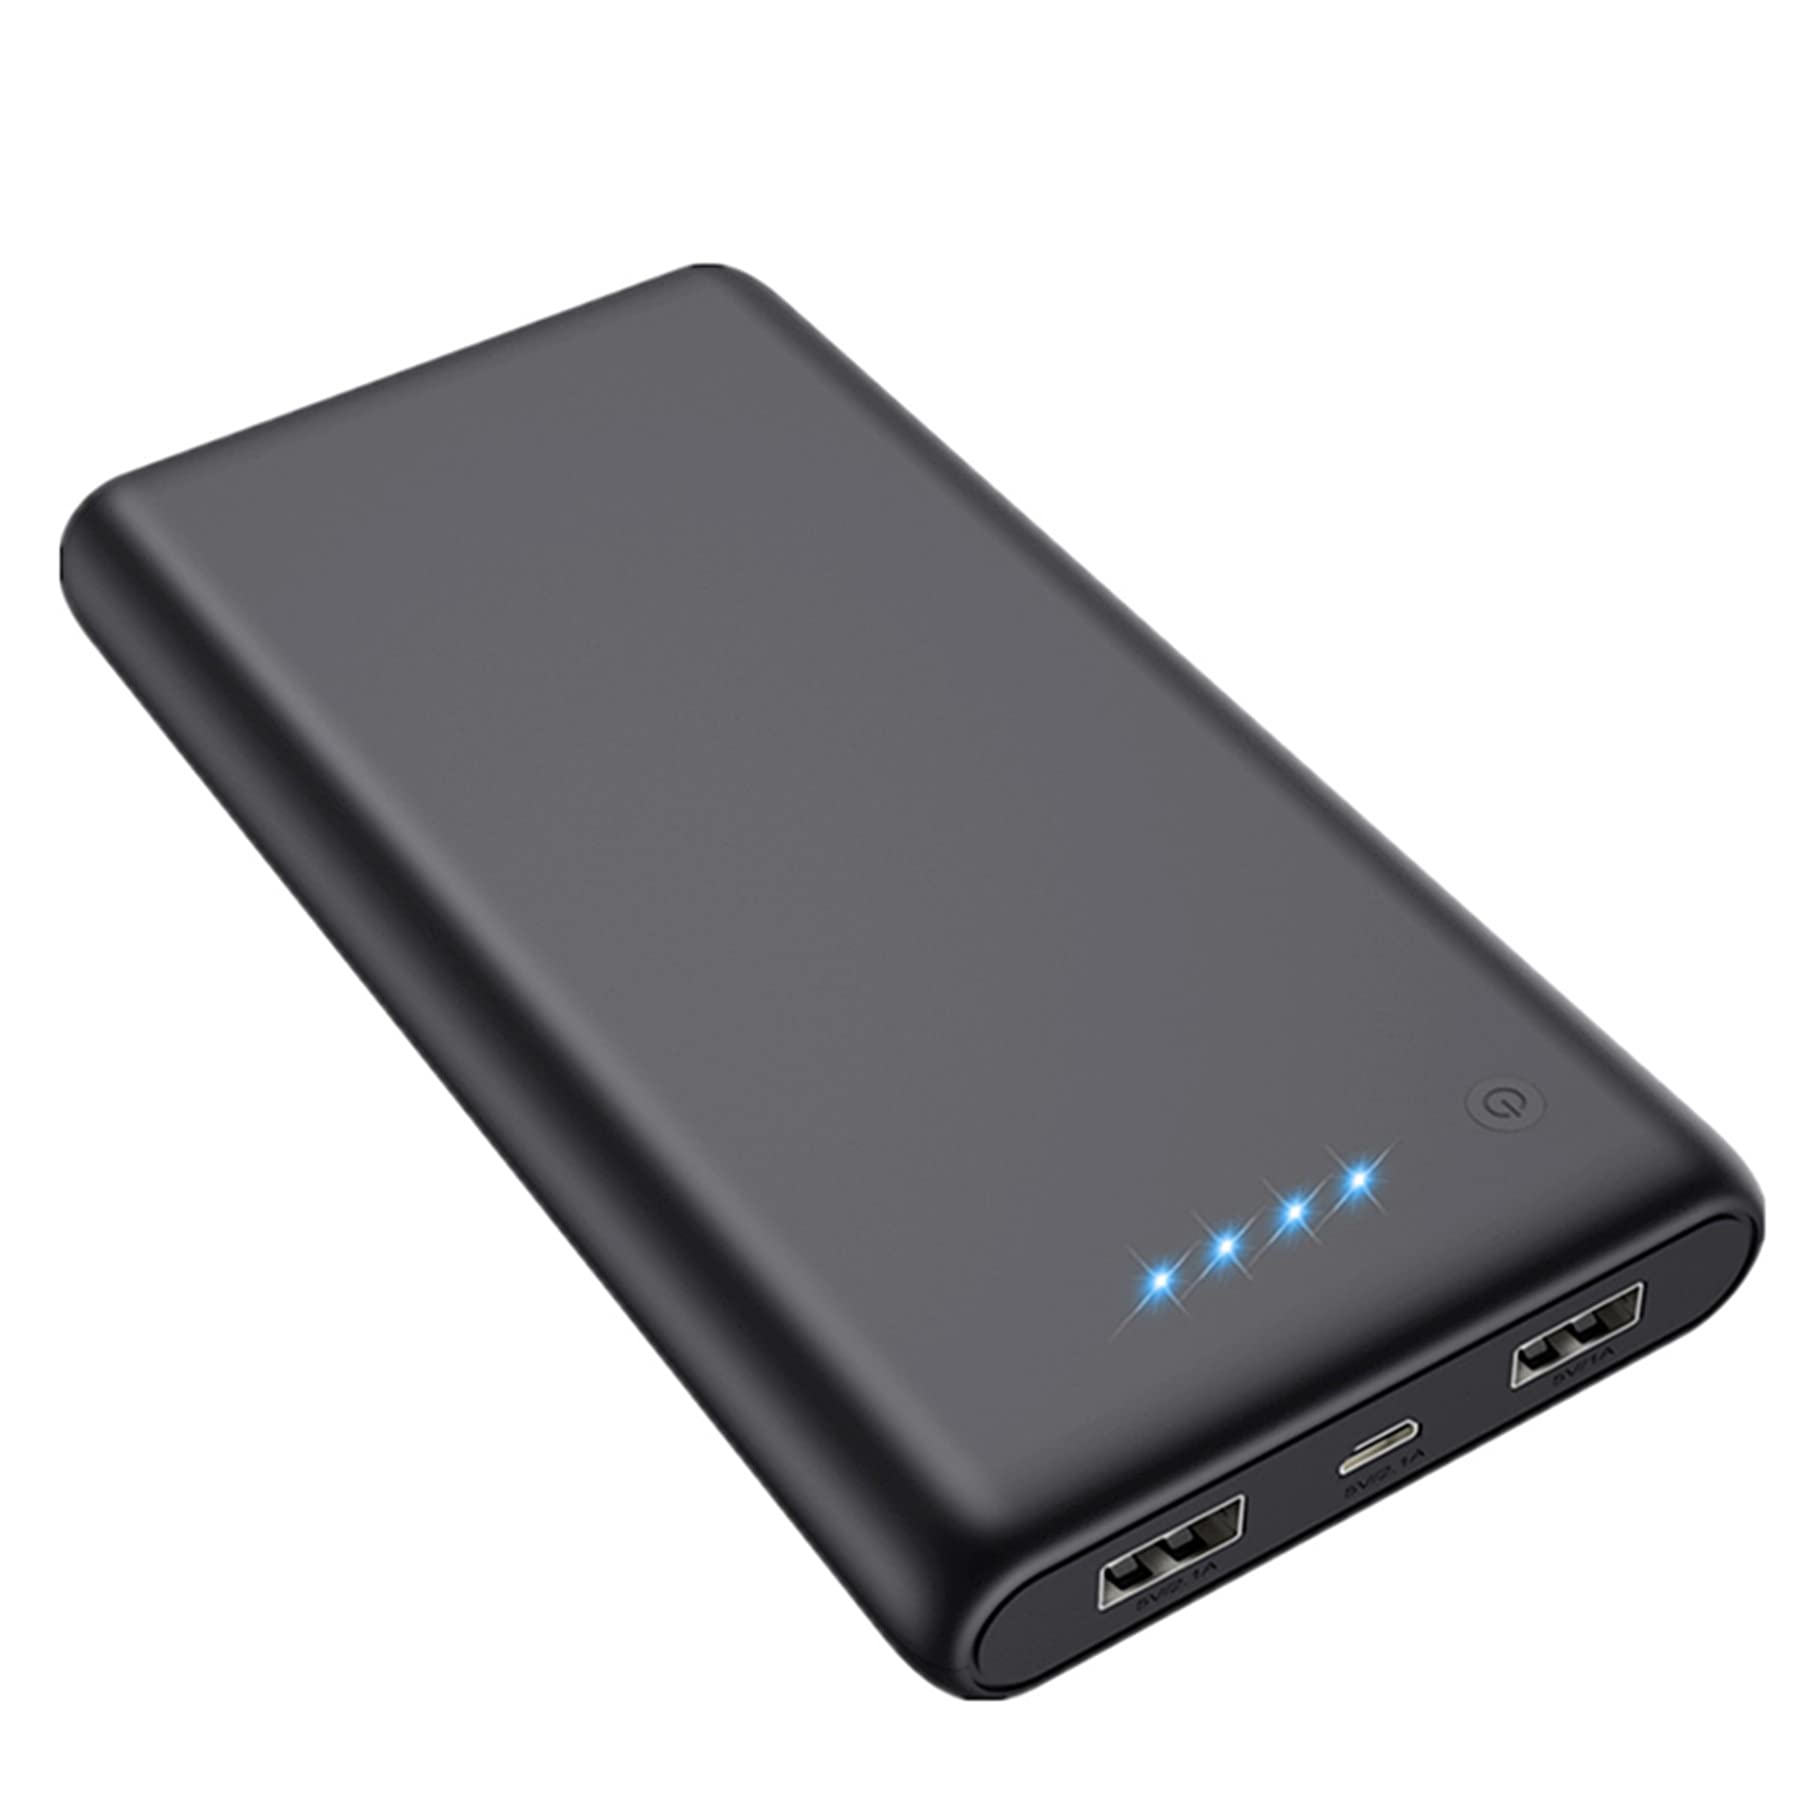 How to know Power bank is fully charged?